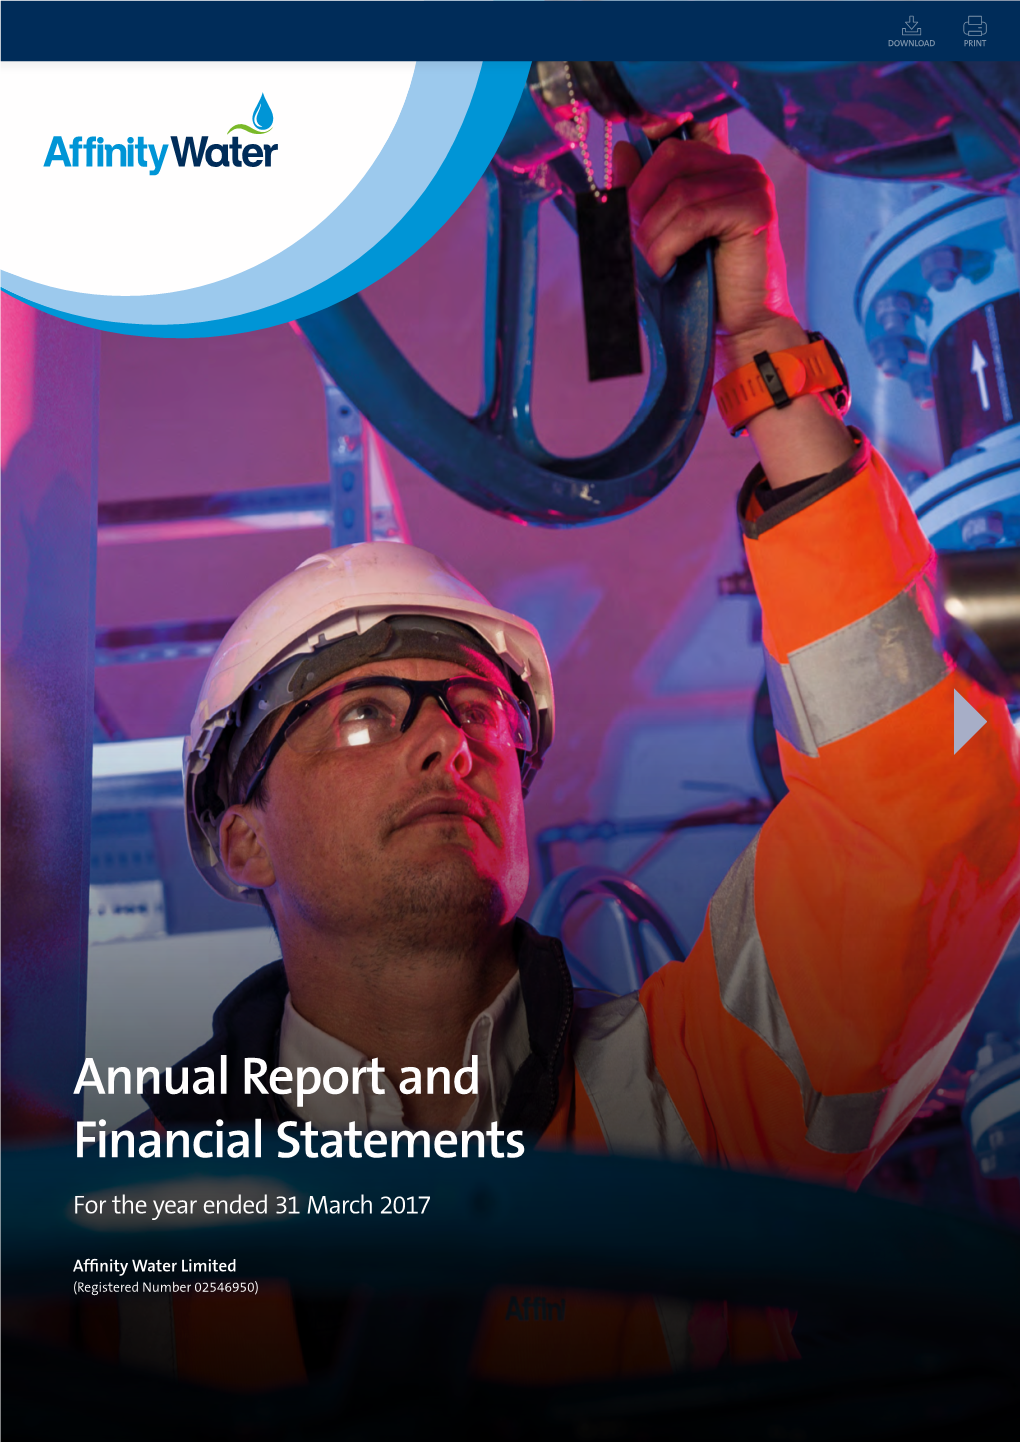 Annual Report and Financial Statements for the Year Ended 31 March 2017